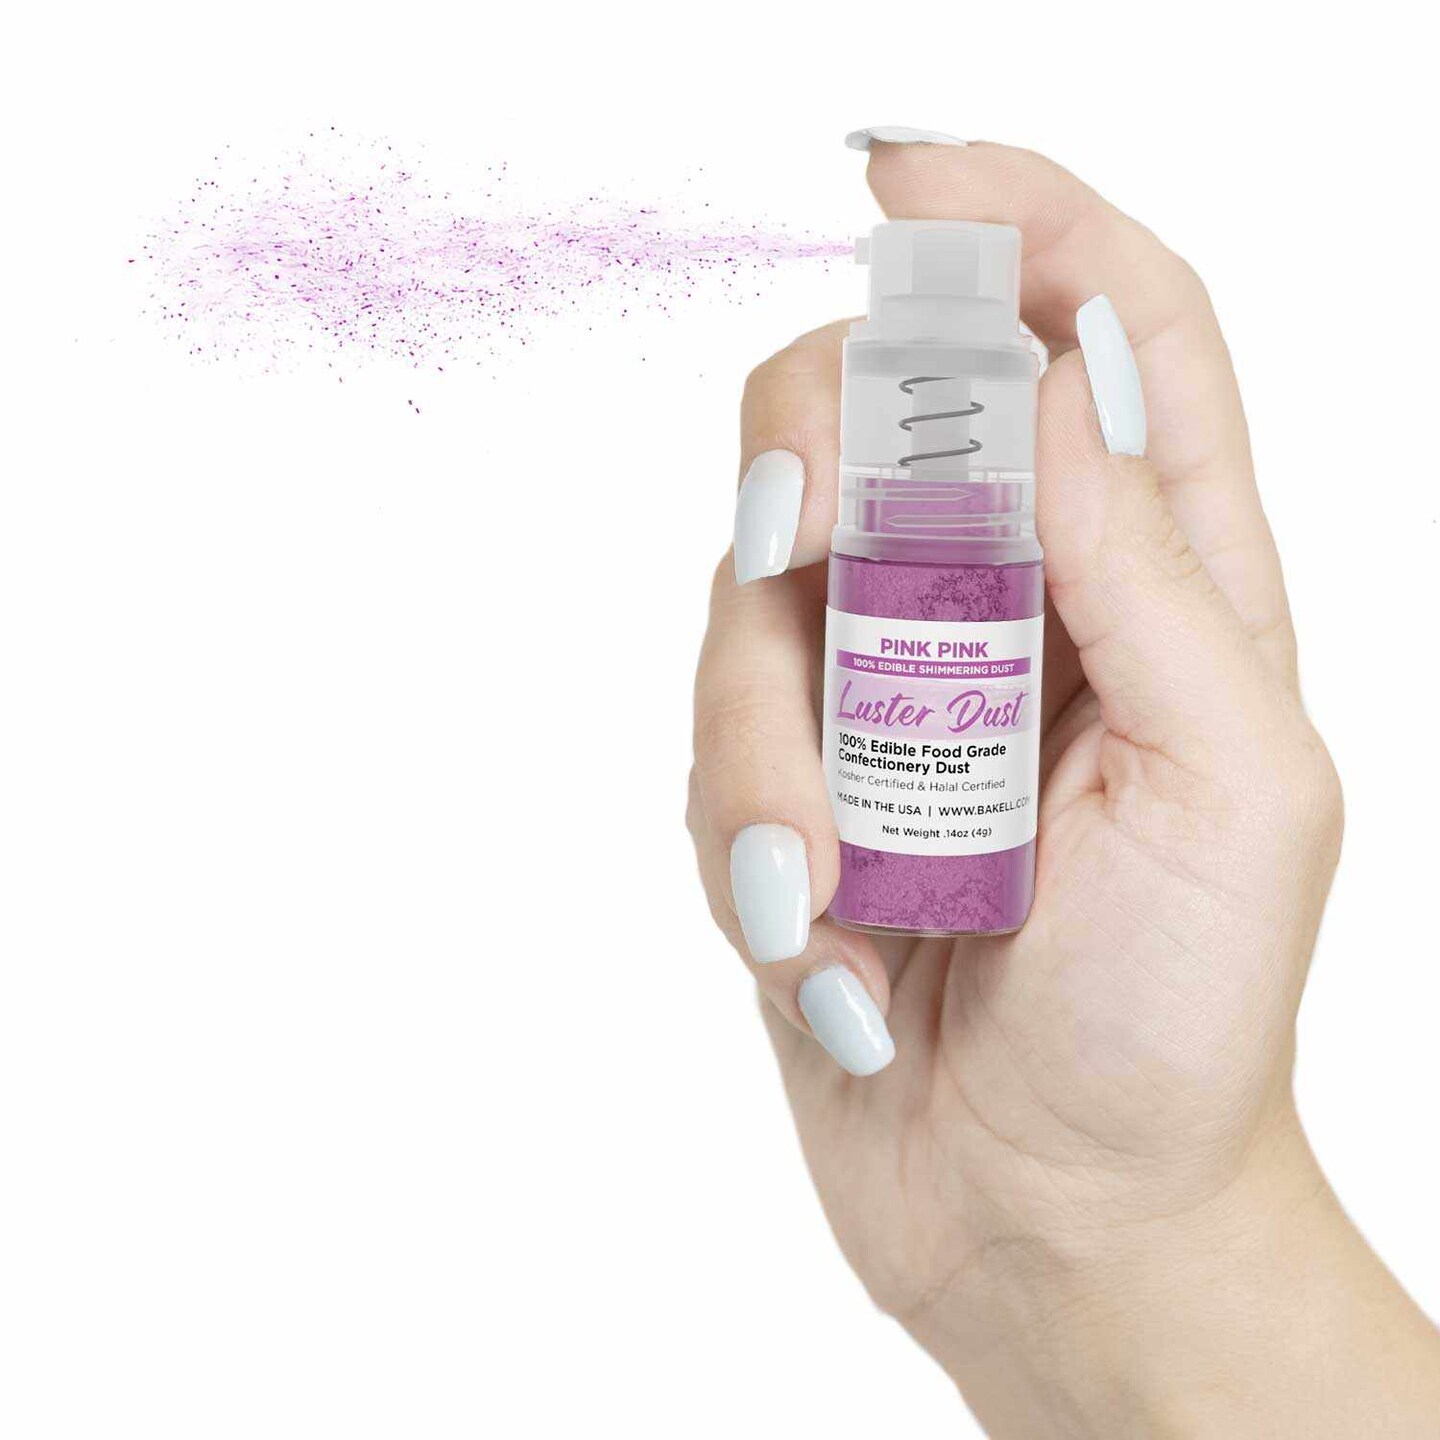 Pink Pink Luster Dust Spray | Luster Dust Edible Glitter Spray Dust for Cakes, Cookies, Desserts, Paint. FDA Compliant (4 Gram Pump)